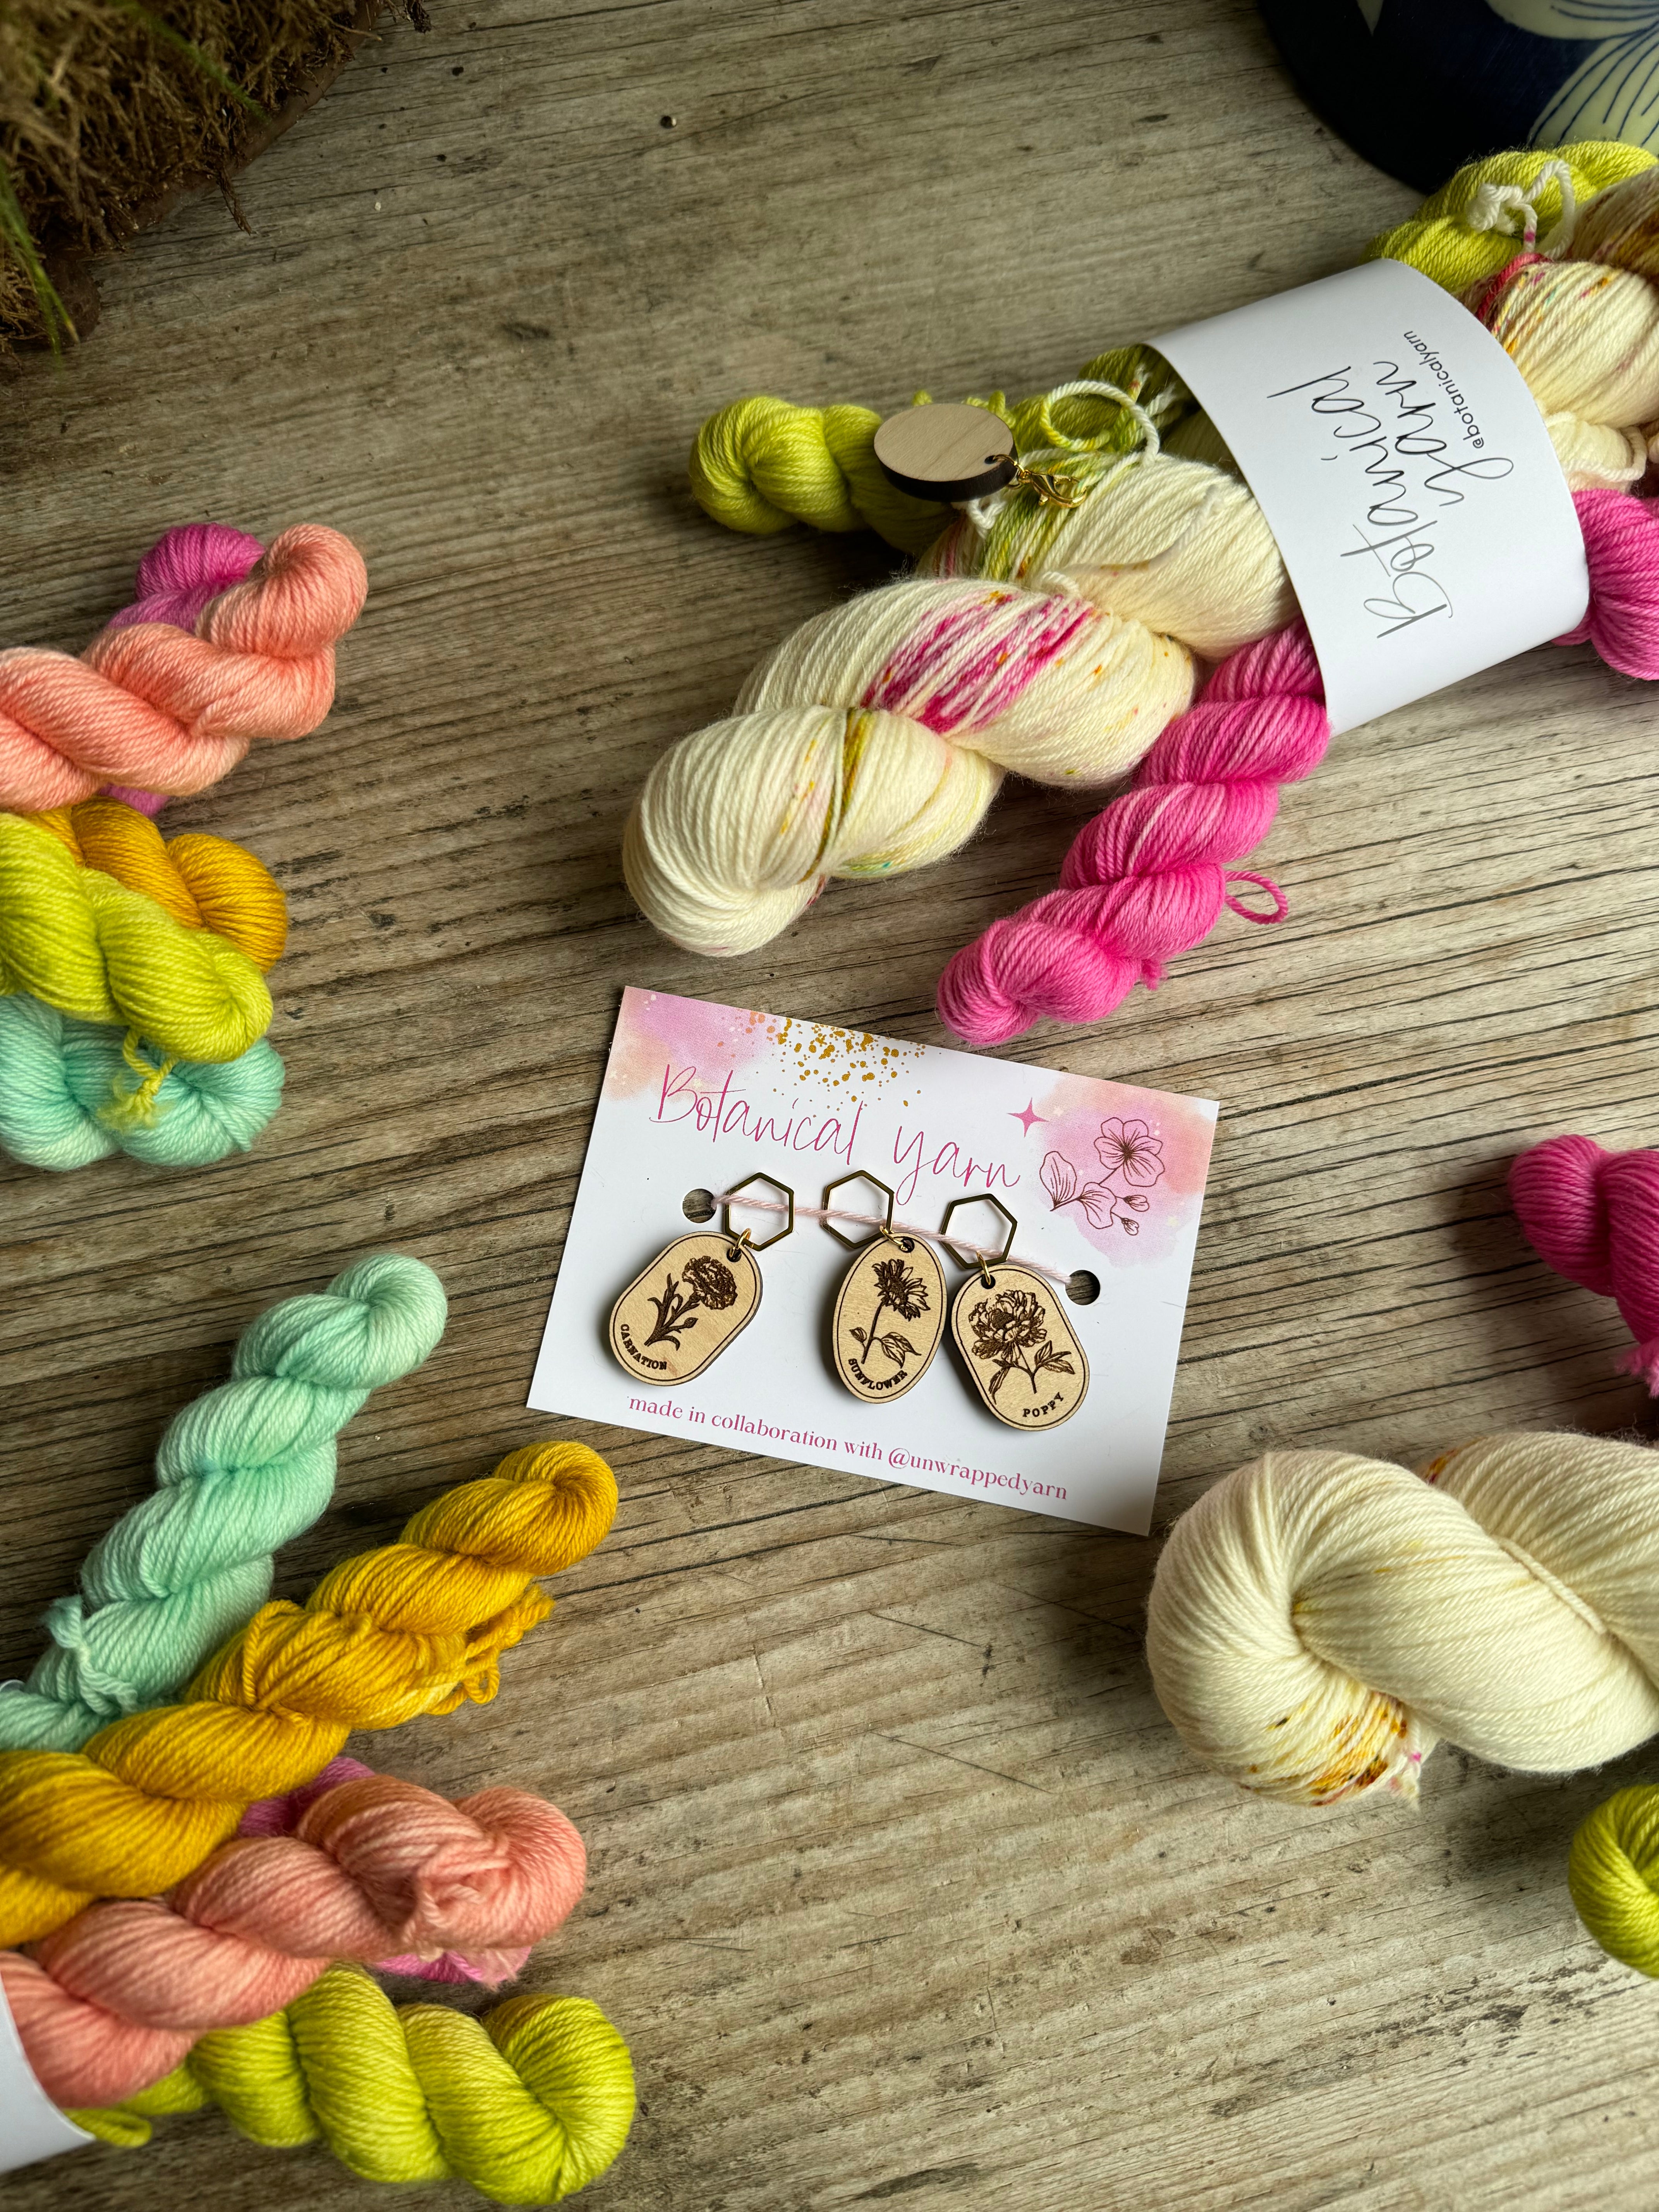 Stitch Festival Stitch markers / progress keepers made in collaboration with Unwrapped Yarn